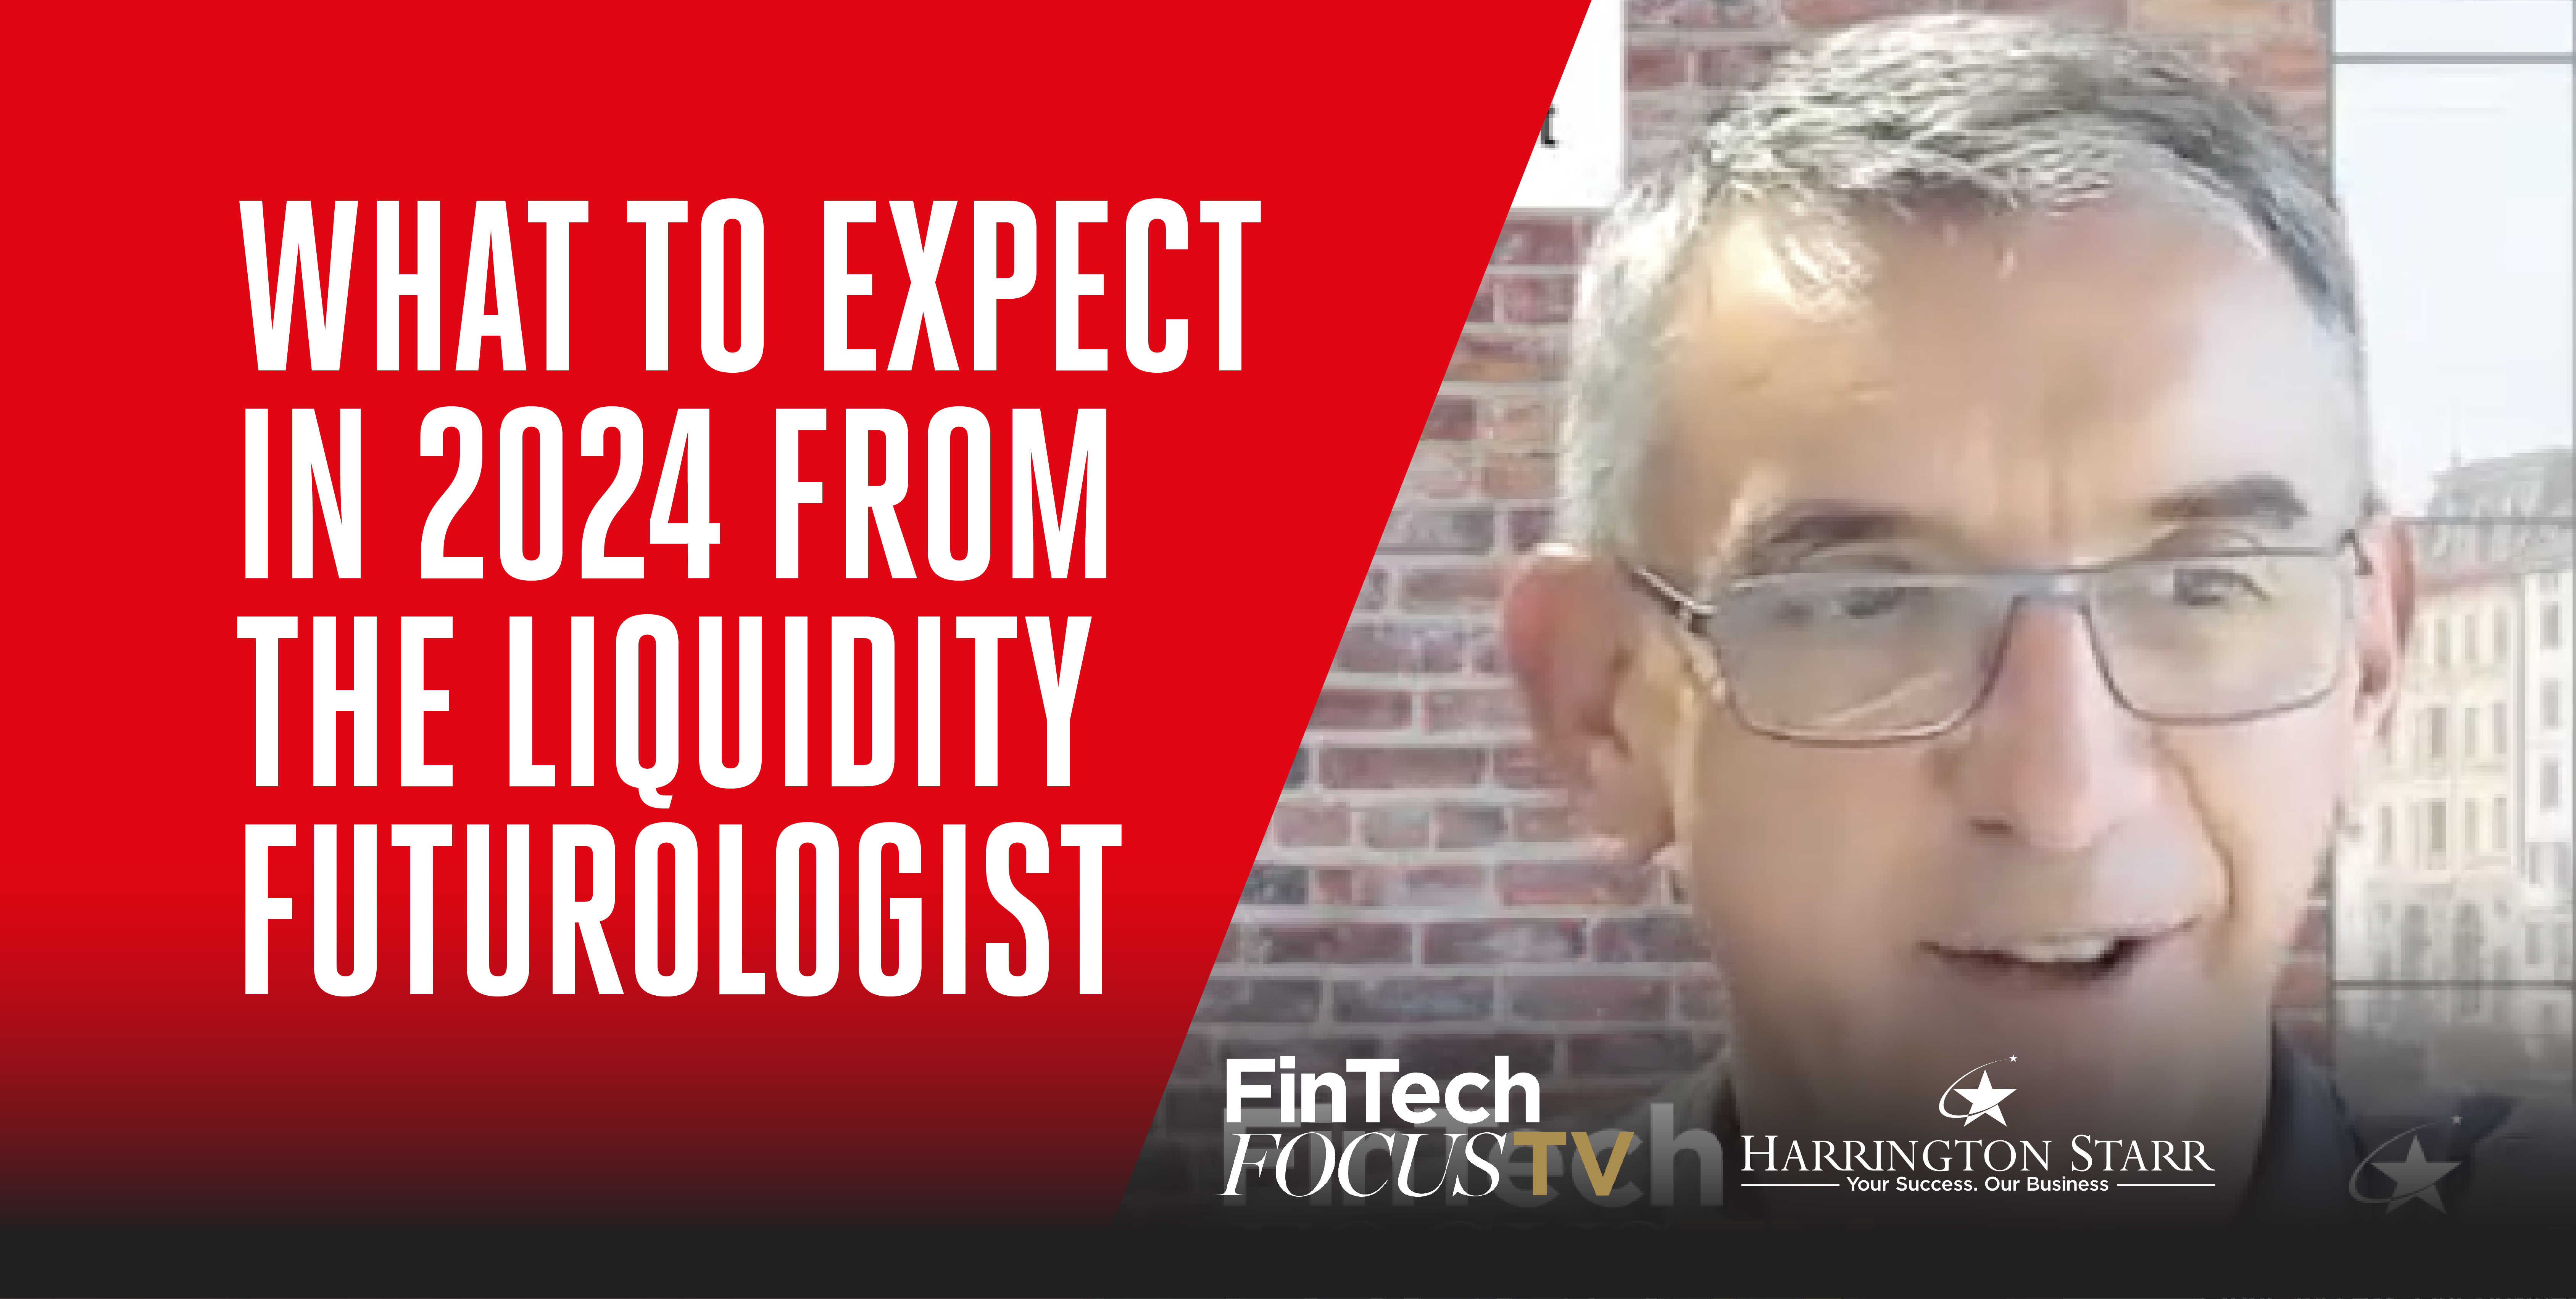 What to expect in 2024 from the Liquidity Futurologist